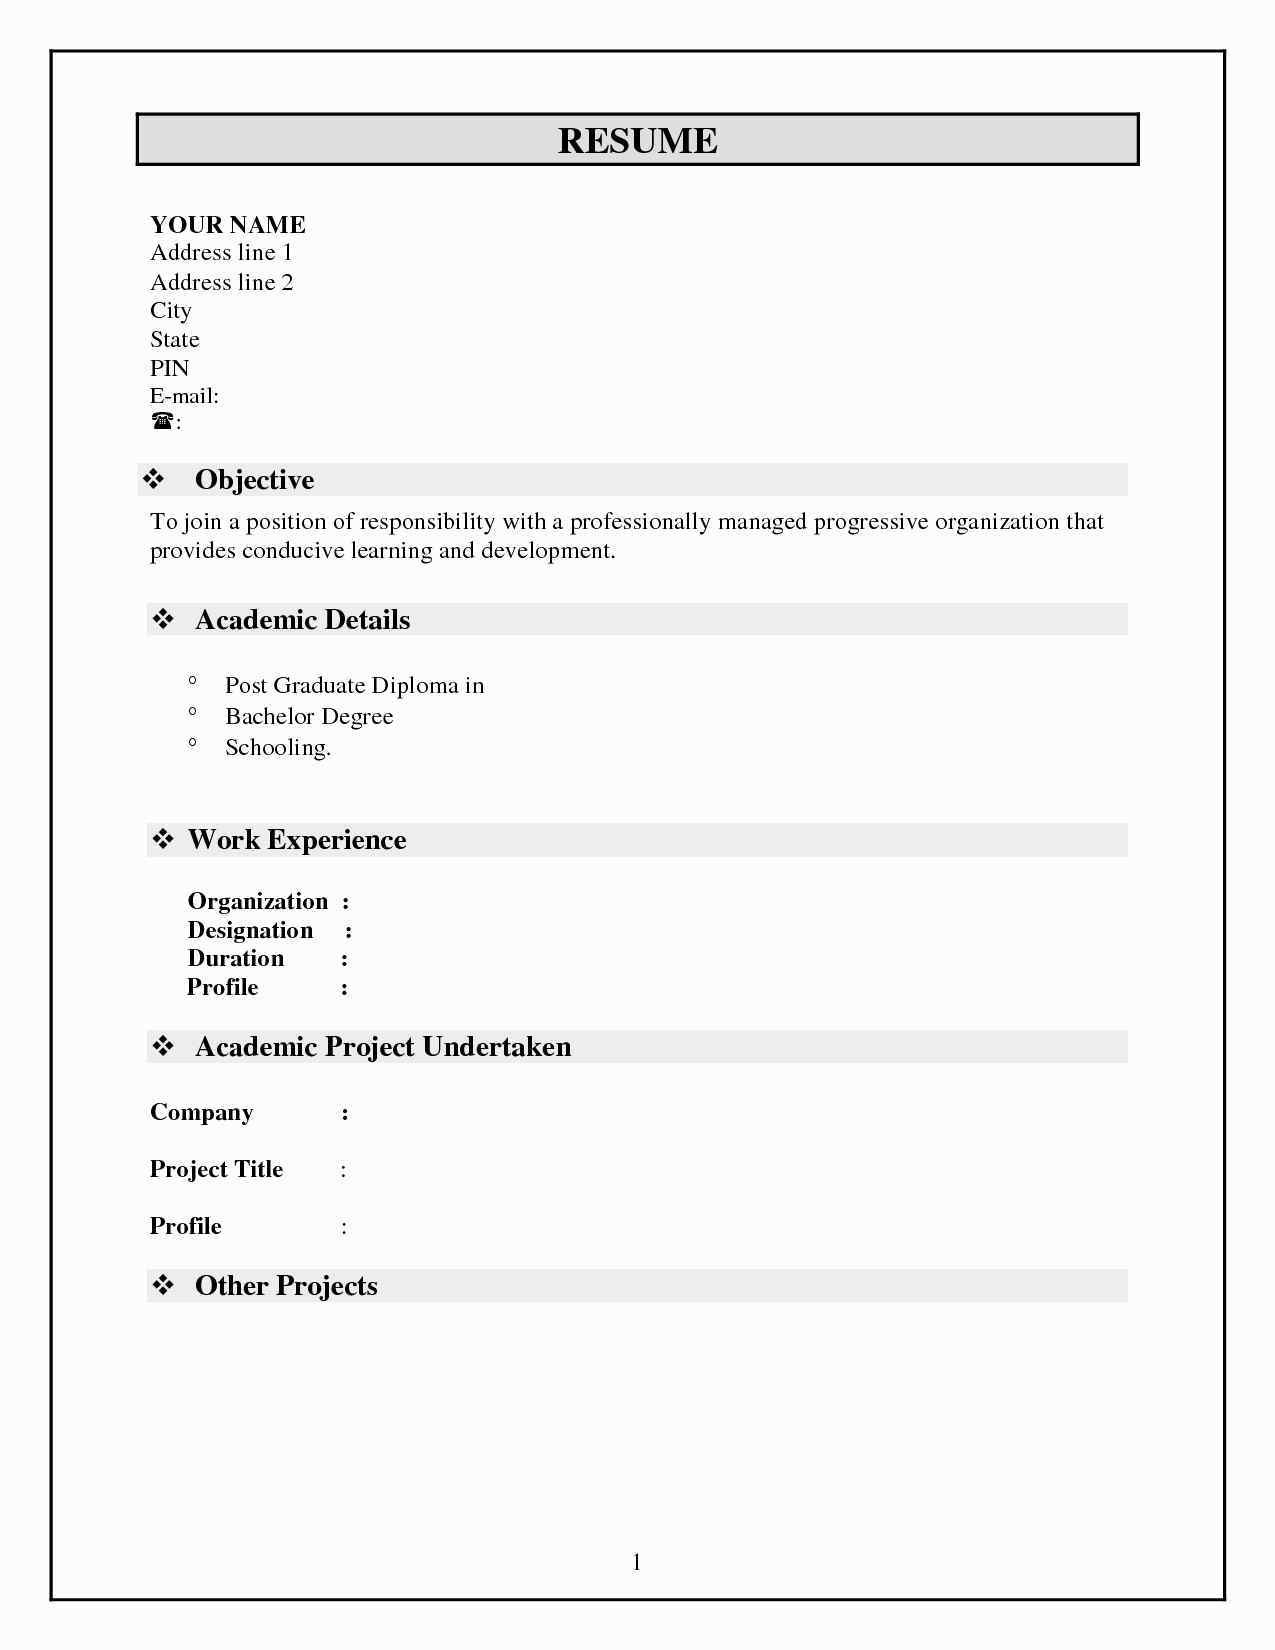 GET COMPLETE INSTRUCTIONS For THIS FORMAT Word Document 30 Images Legal Templates Free Download